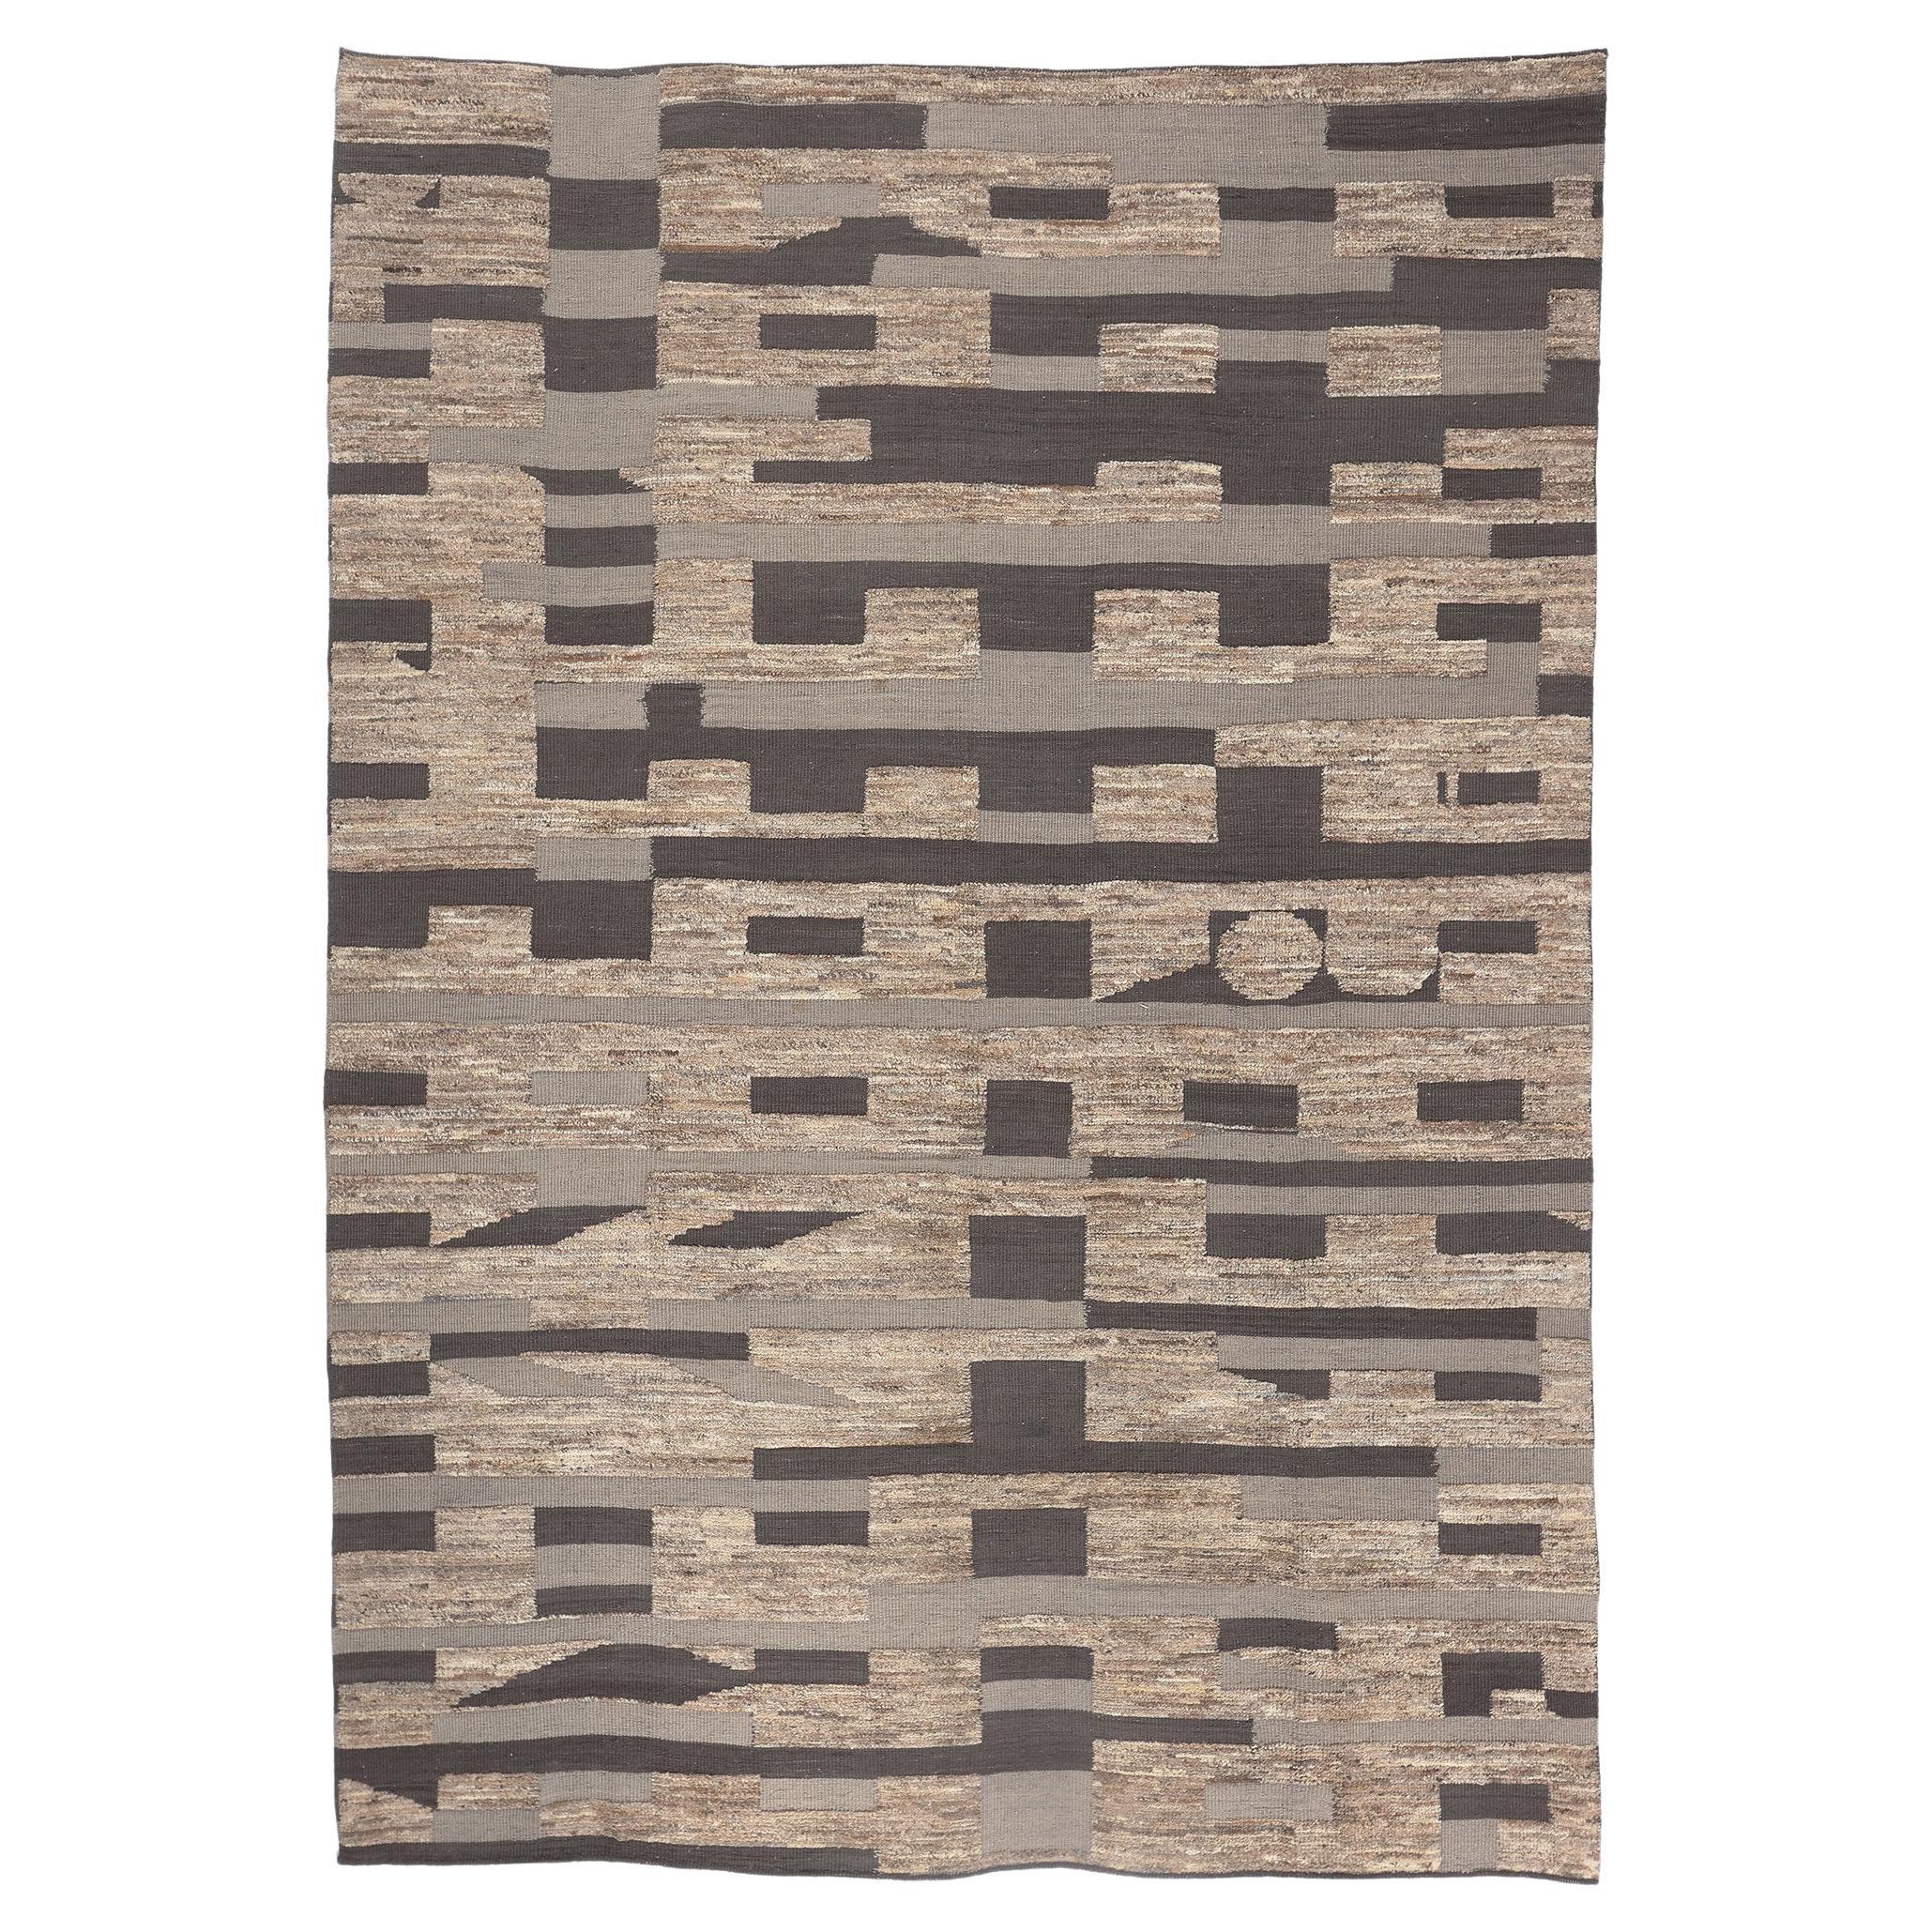 Earth-Tone Modern Moroccan High-Low Rug with Bauhaus Style For Sale